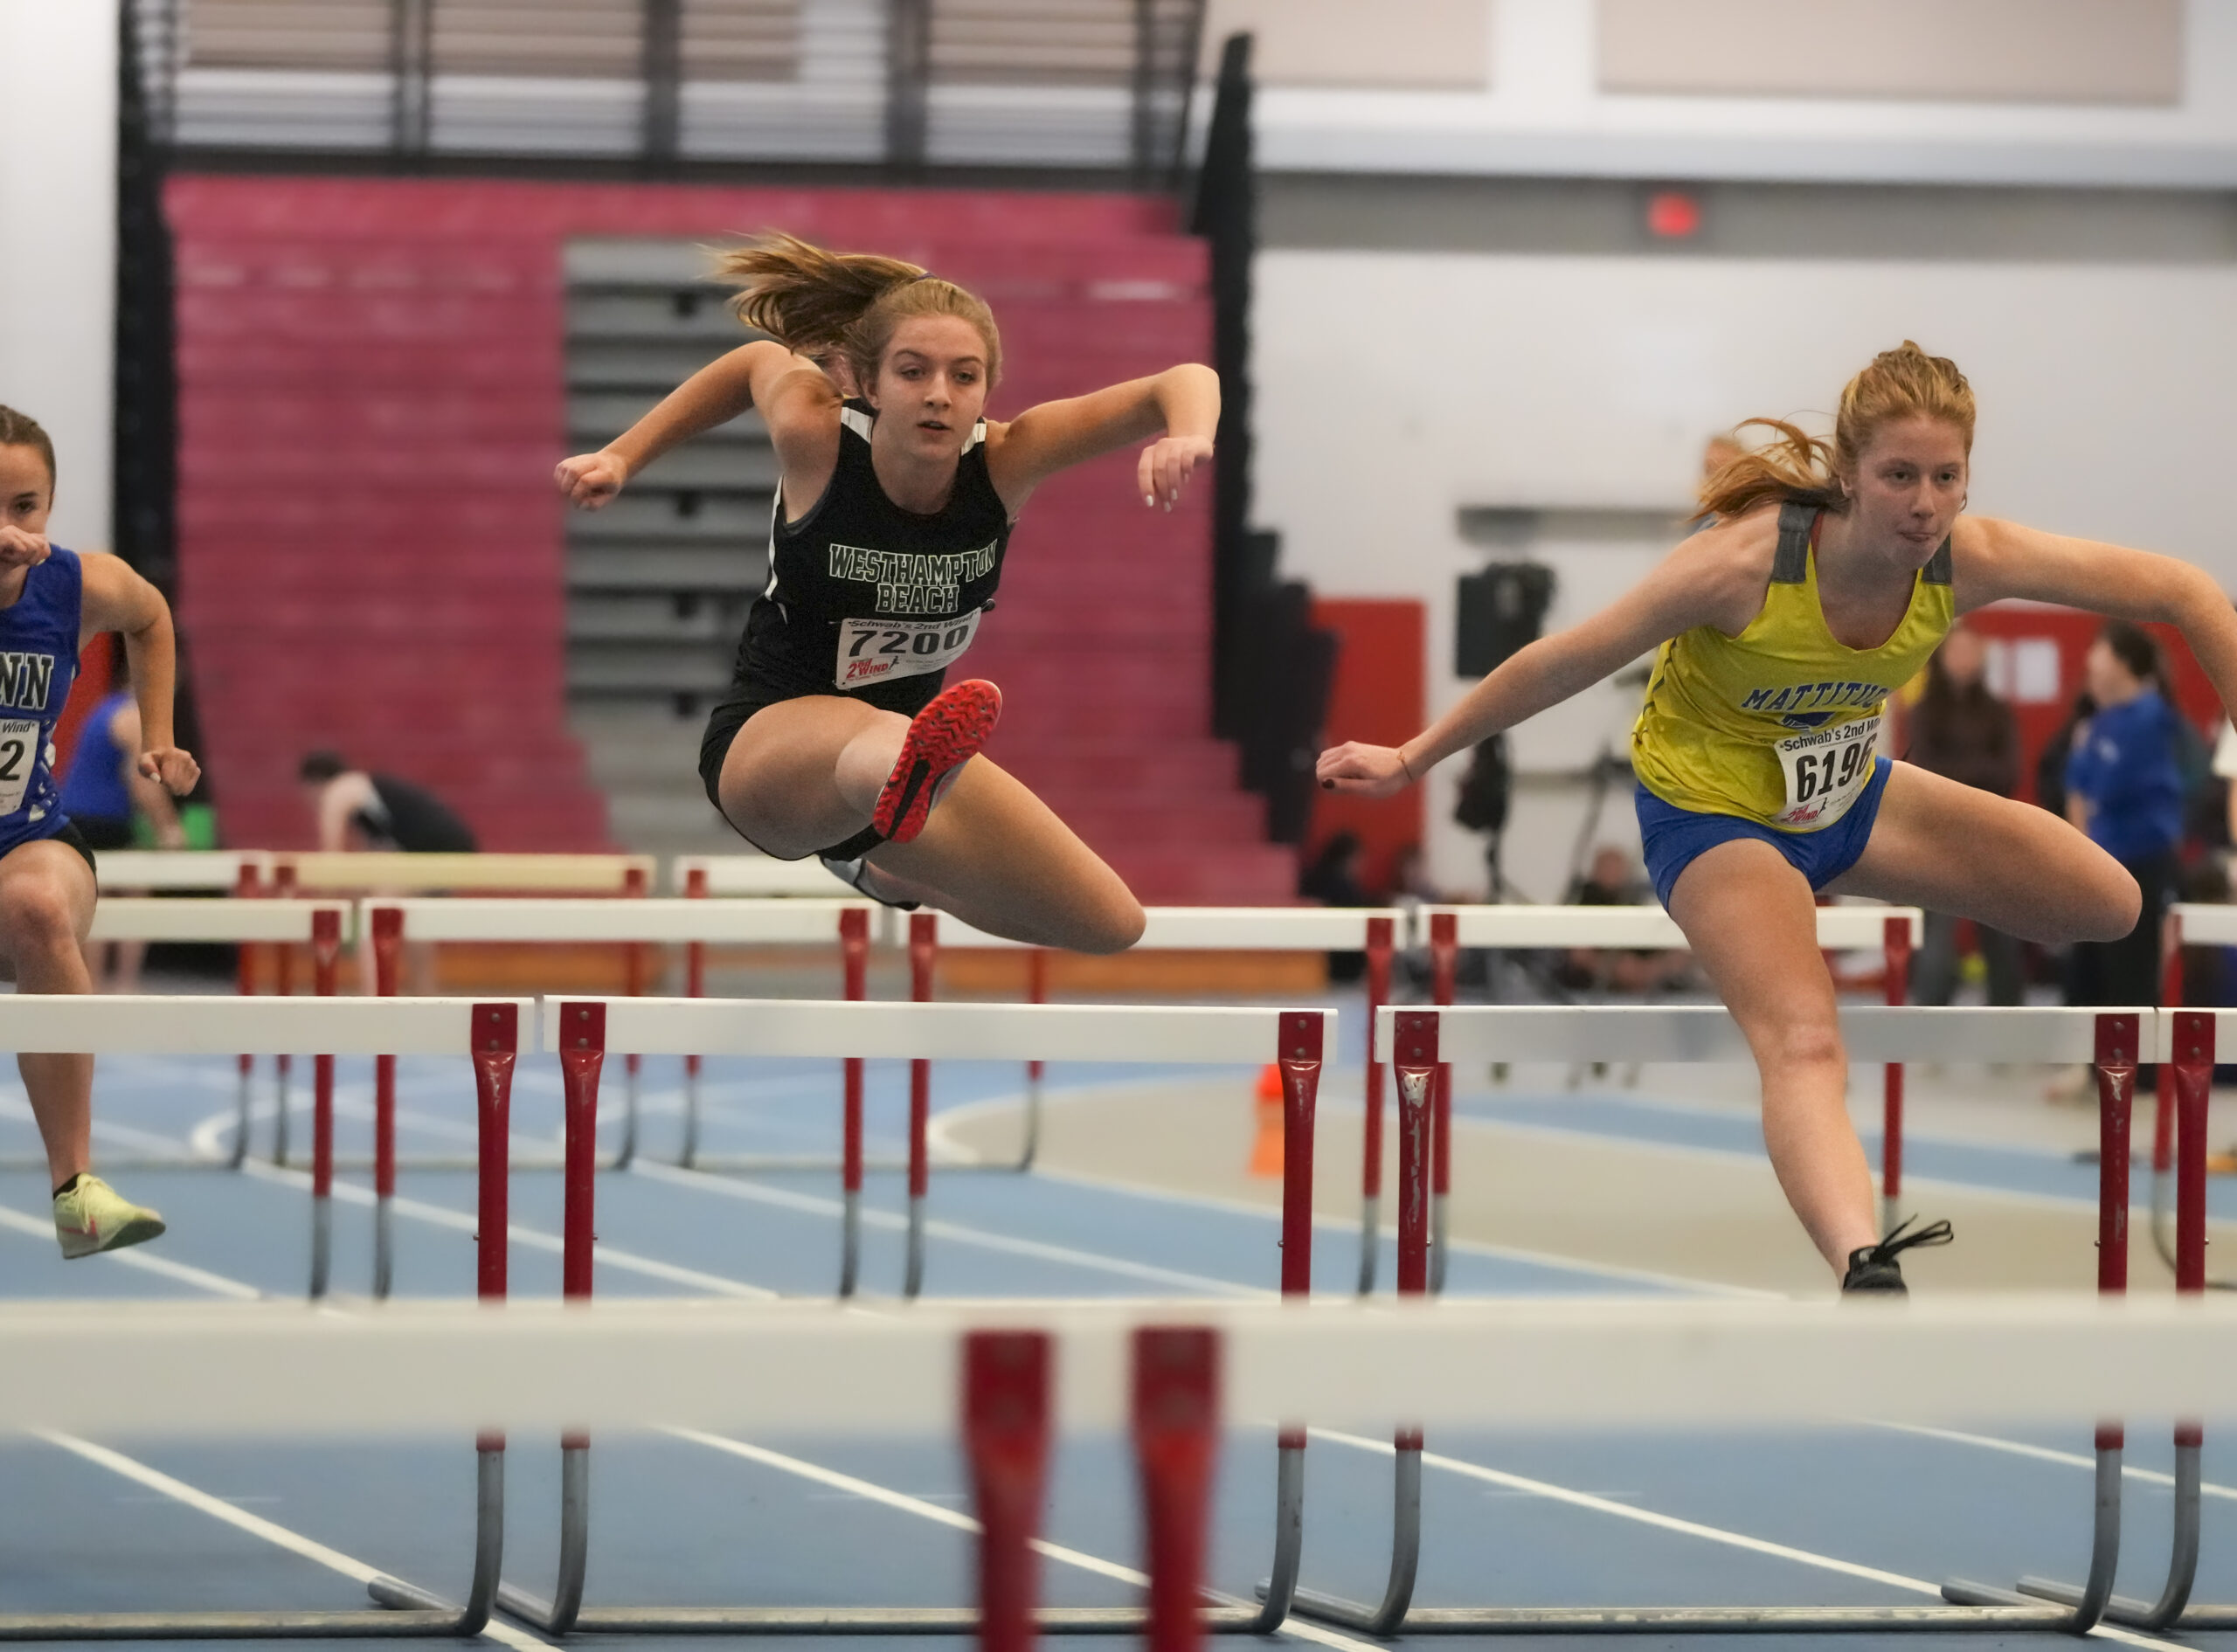 Madison Phillips of Westhampton Beach in the 55-meter hurdles on Sunday.
RON ESPOSITO